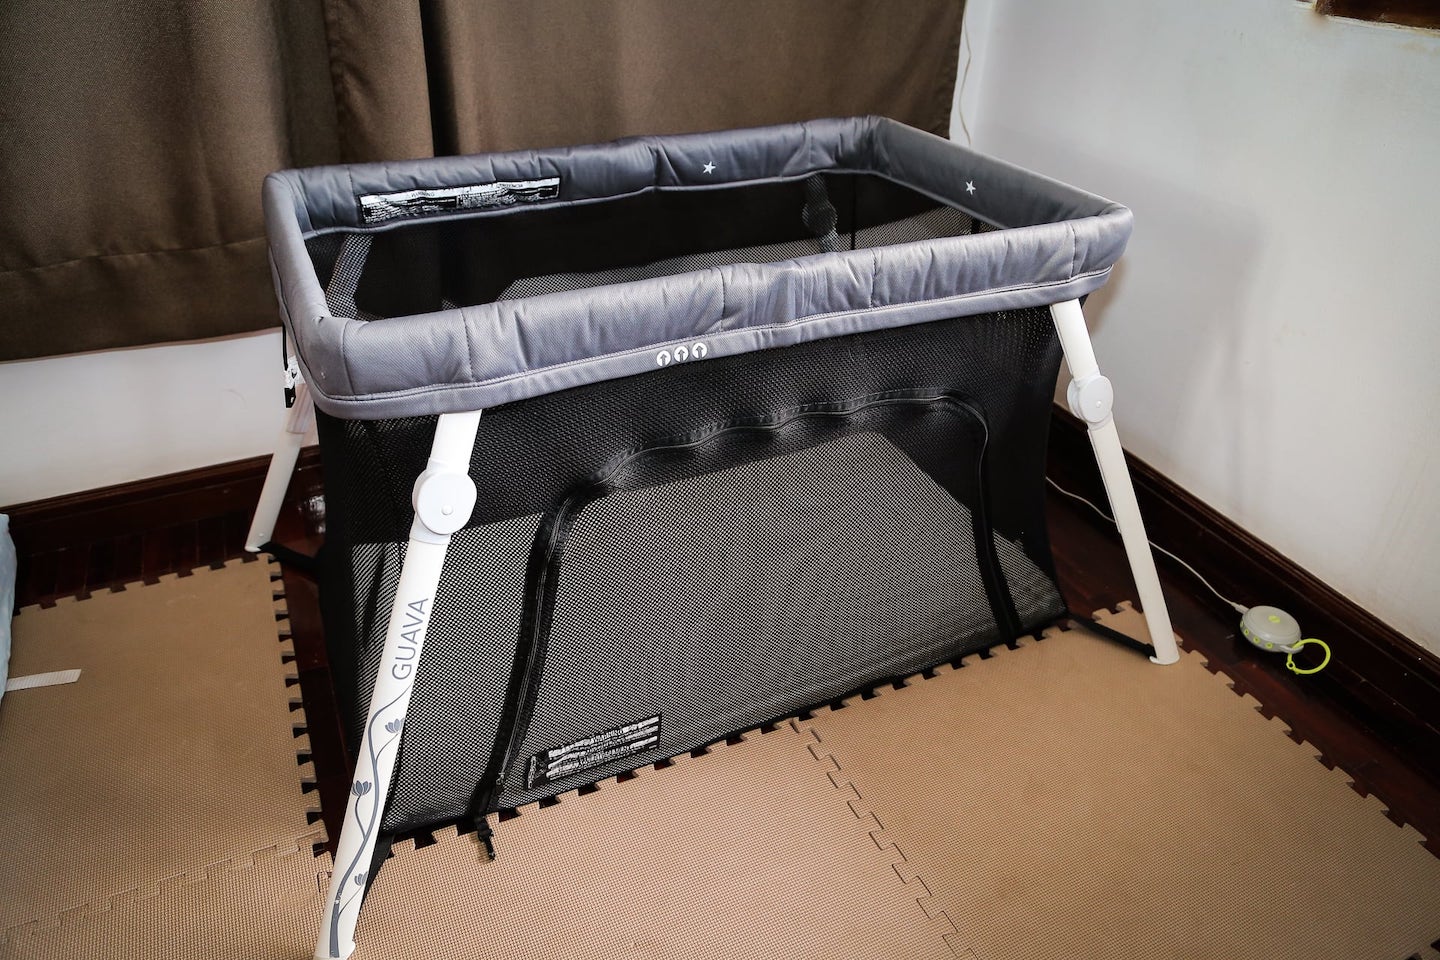 Guava Lotus Travel Crib reviewset up in room for toddler